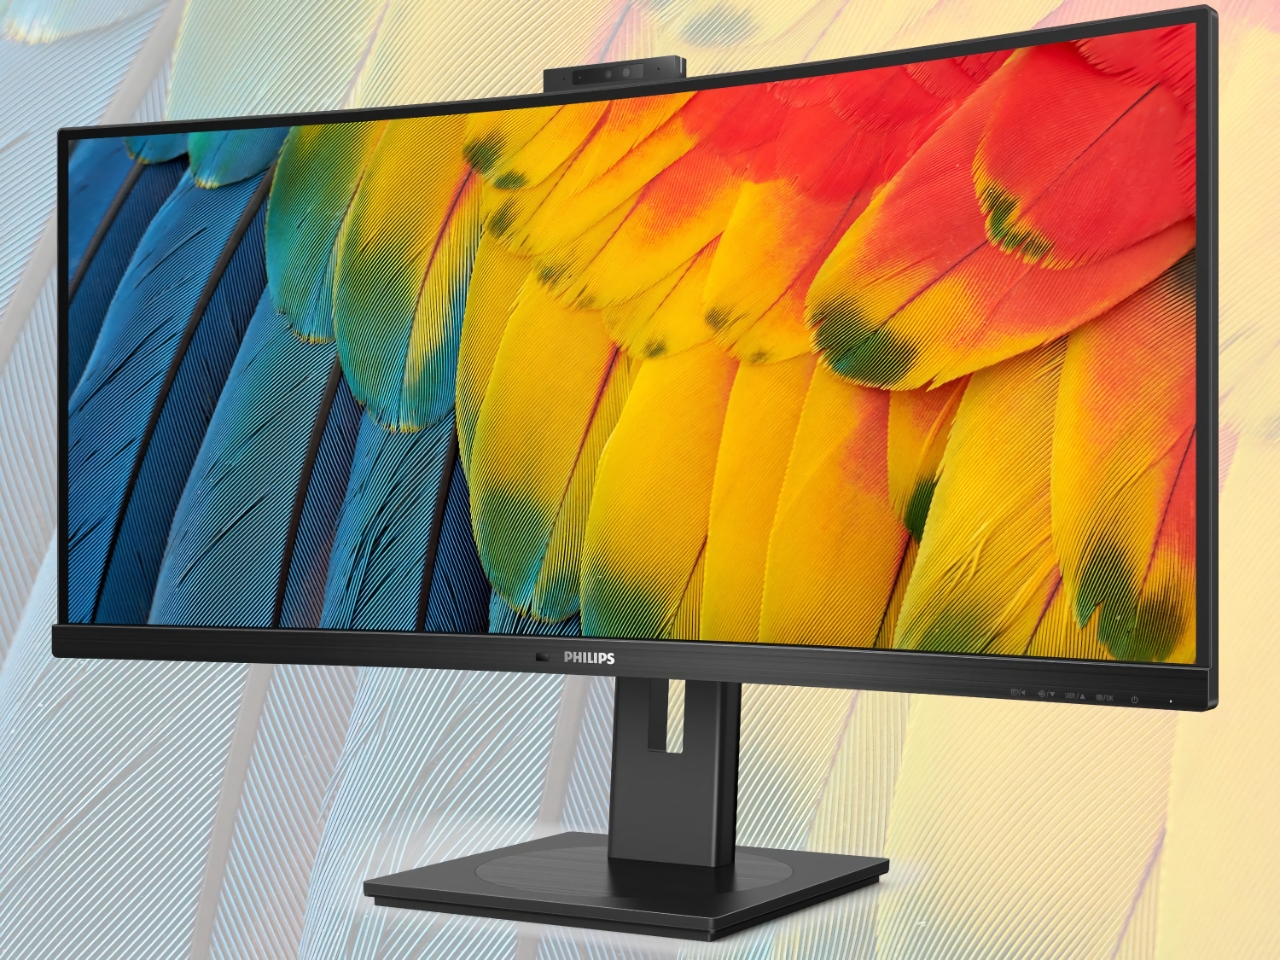 Philips introduced a new line of monitors with screens up to 34 inches, built-in webcams, Windows Hello support and USB-C hub